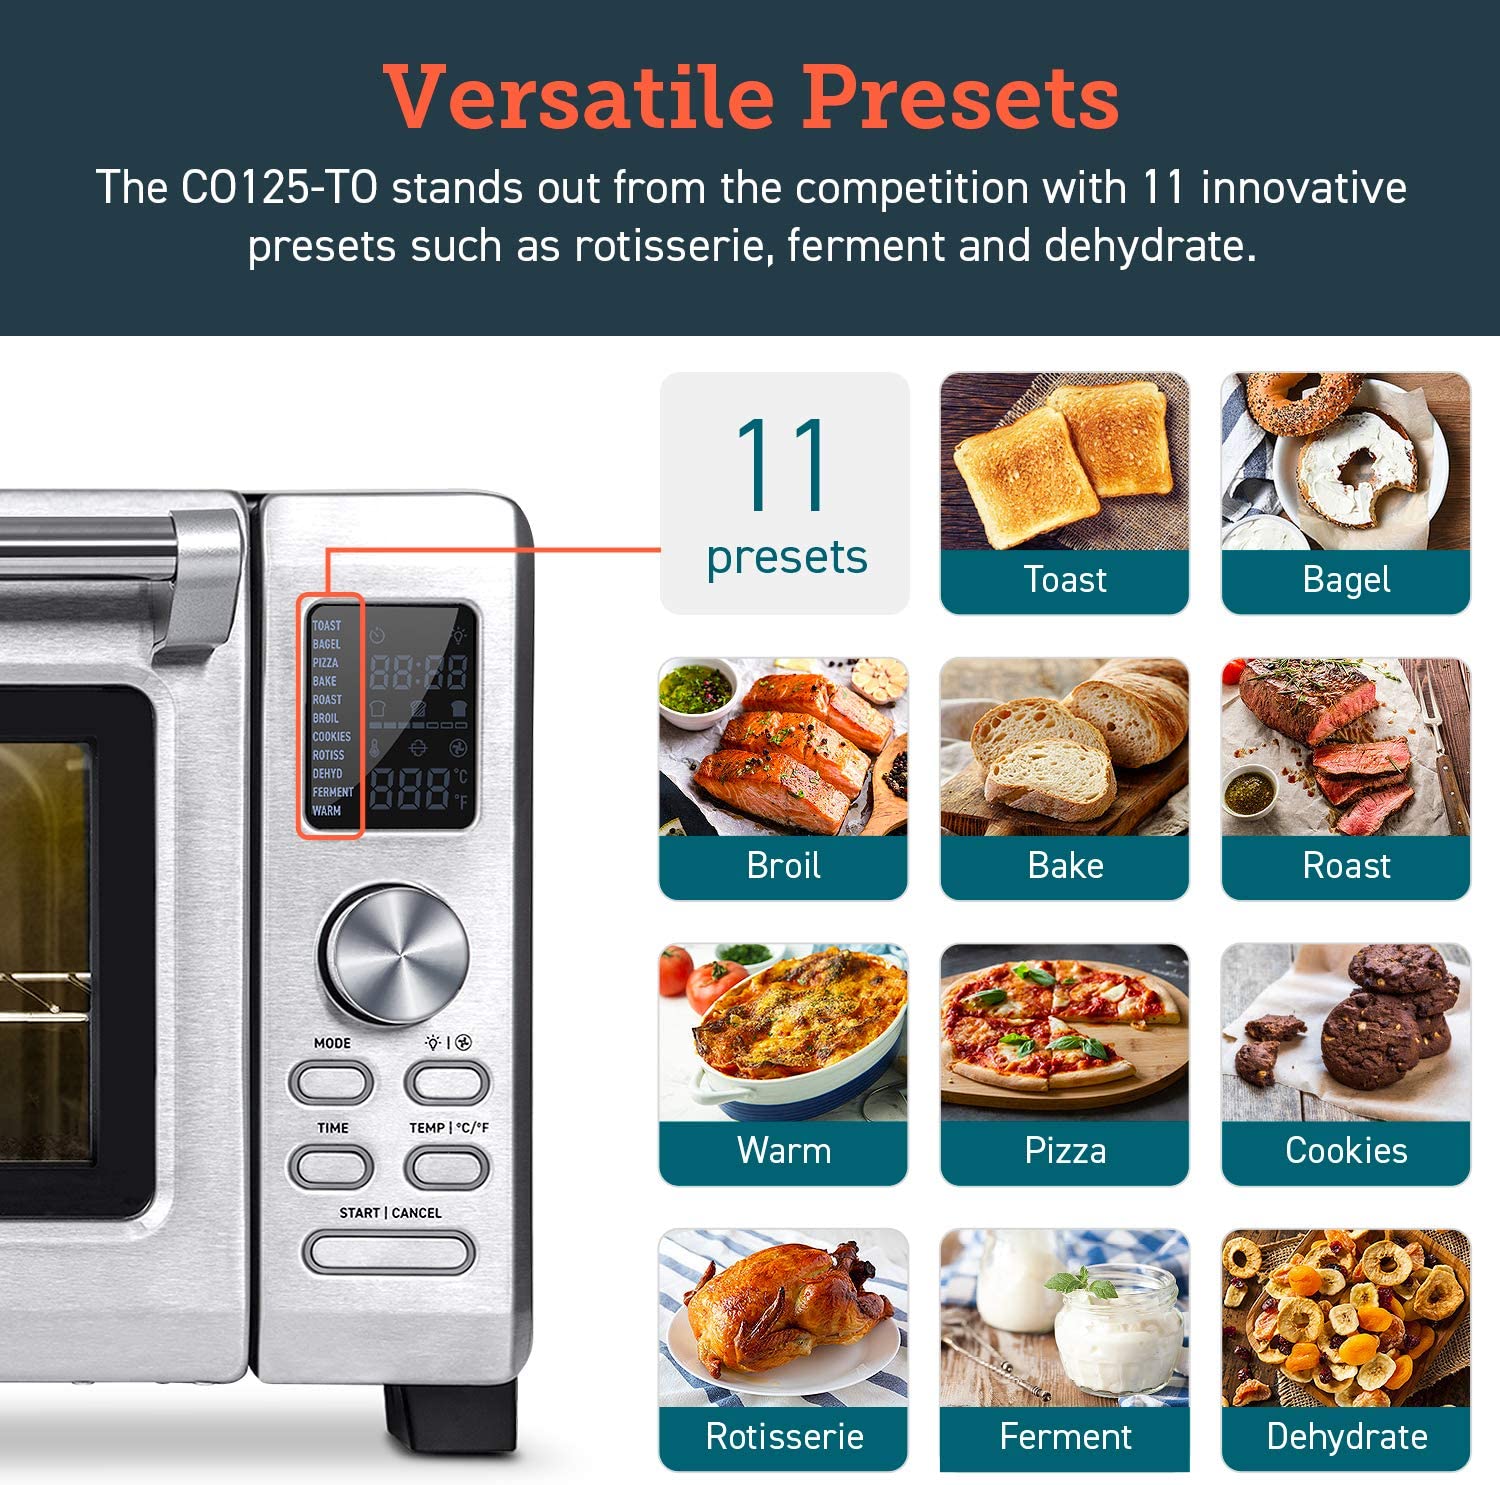 https://discounttoday.net/wp-content/uploads/2022/11/COSORI-Toaster-Oven-11-in-1-Convection-ovens-countertop-Rotisserie-Dehydrator-12-inch-pizza-52-Recipes-5-Accessories-CO125-TO-26.4QT-Stainless-steel1.jpg